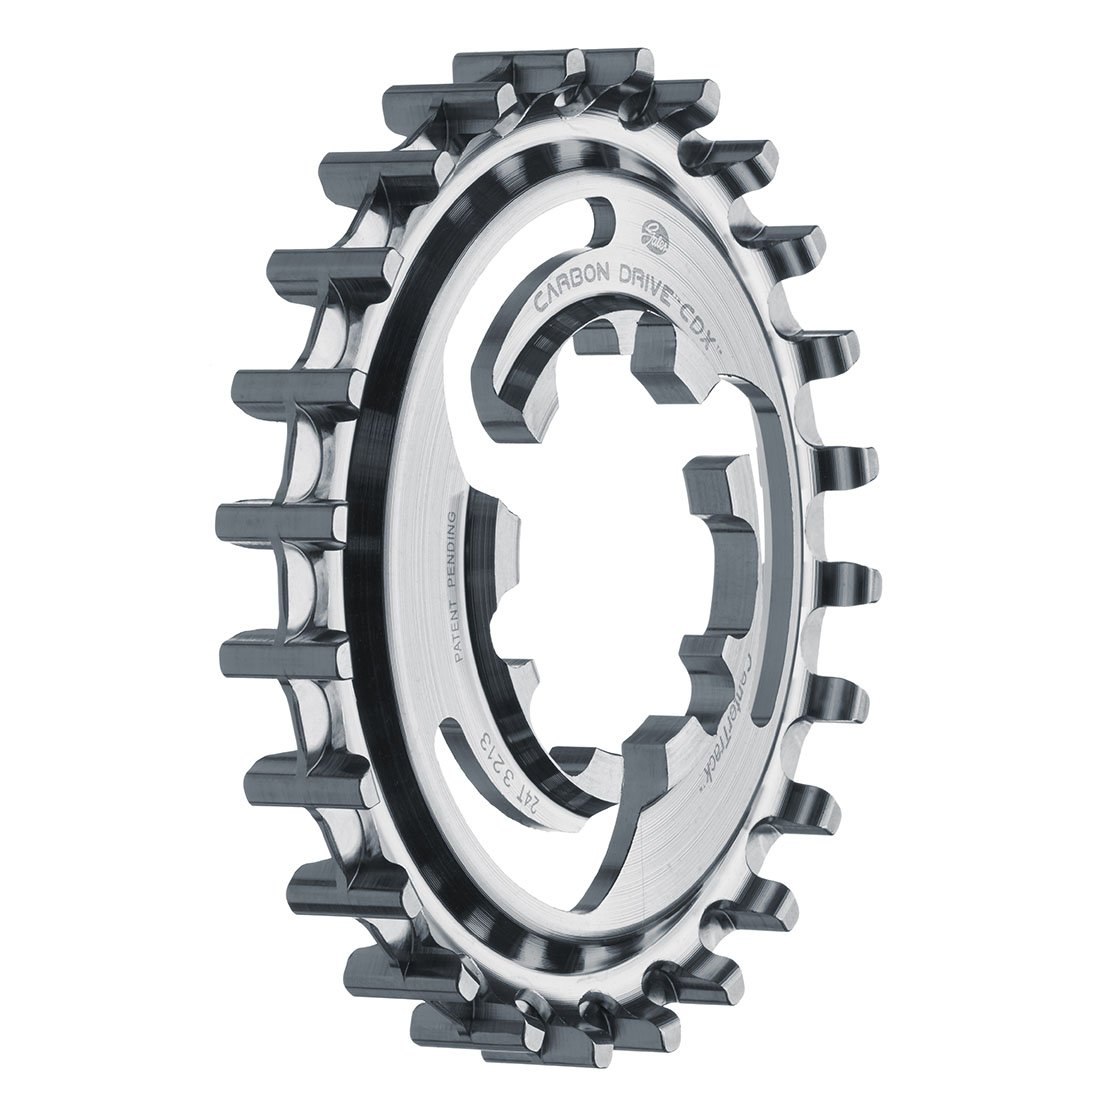 Picture of Gates Carbon Drive CDX Centertrack Sprocket - Rear | Enviolo - stainless steel